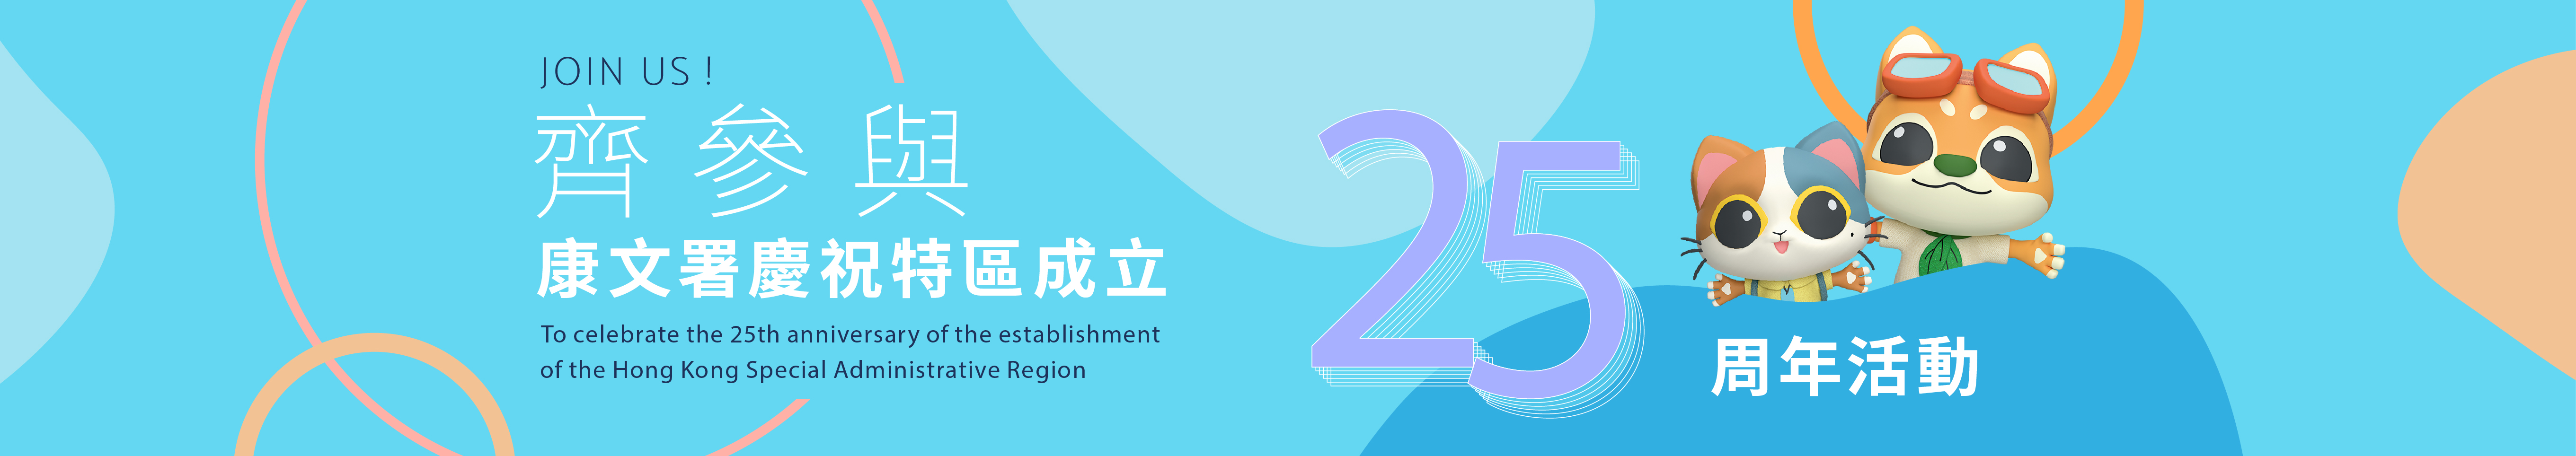 LCSD programmes in celebration of the 25th anniversary of the establishment of the HKSAR